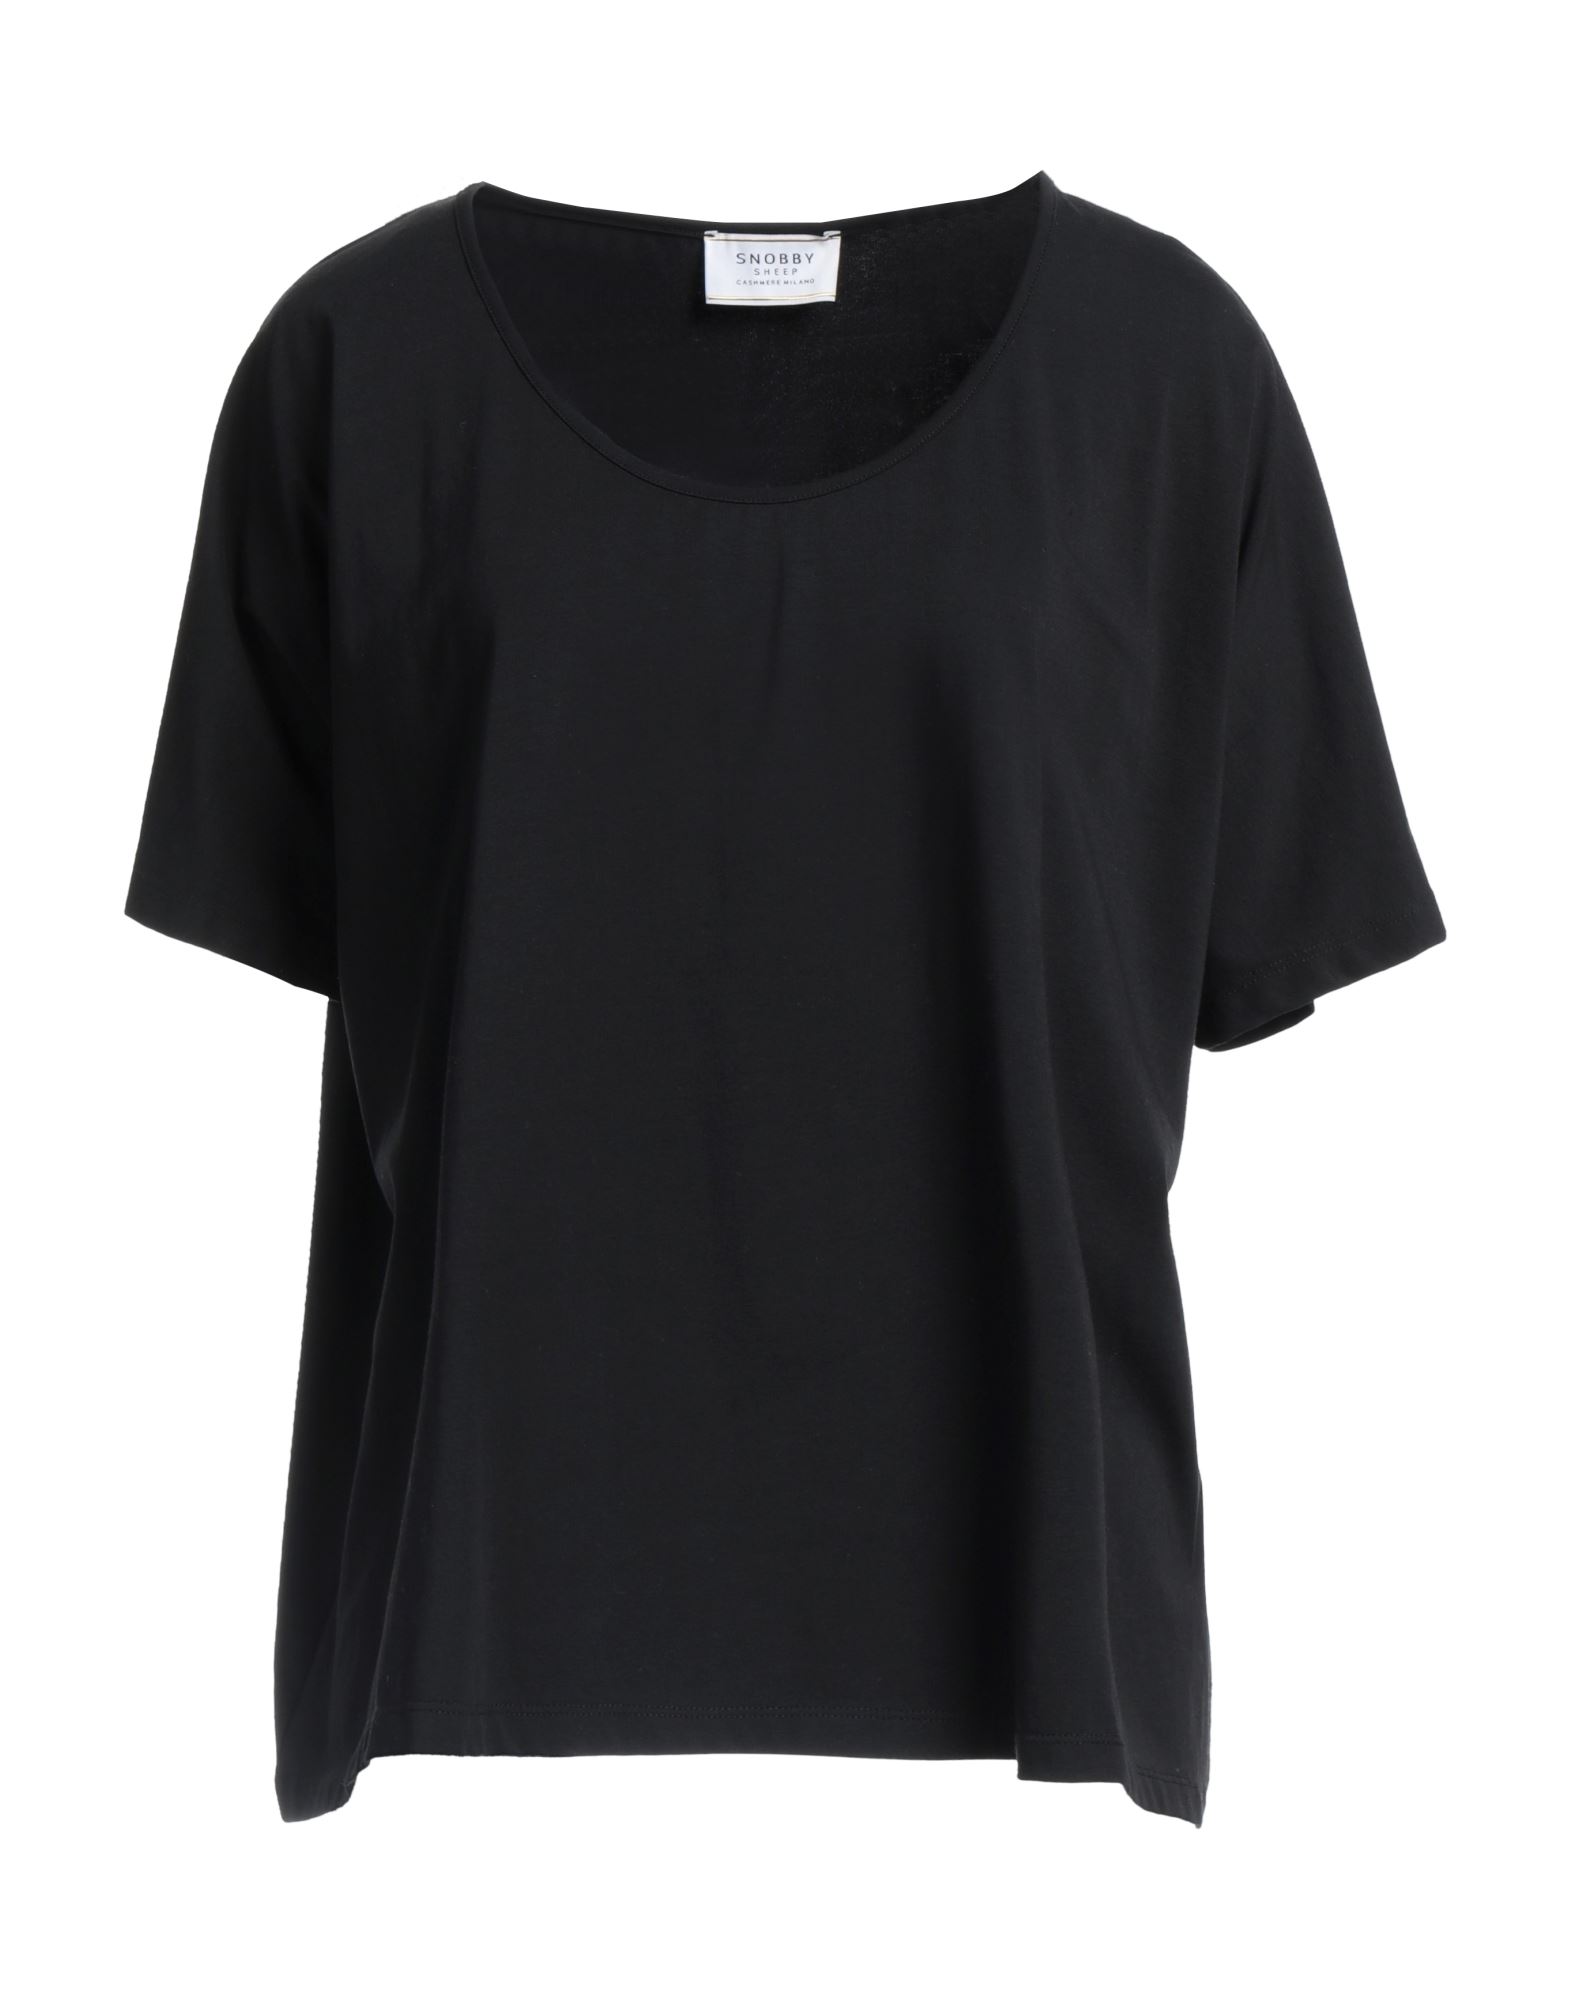 Snobby Sheep T-shirts In Black